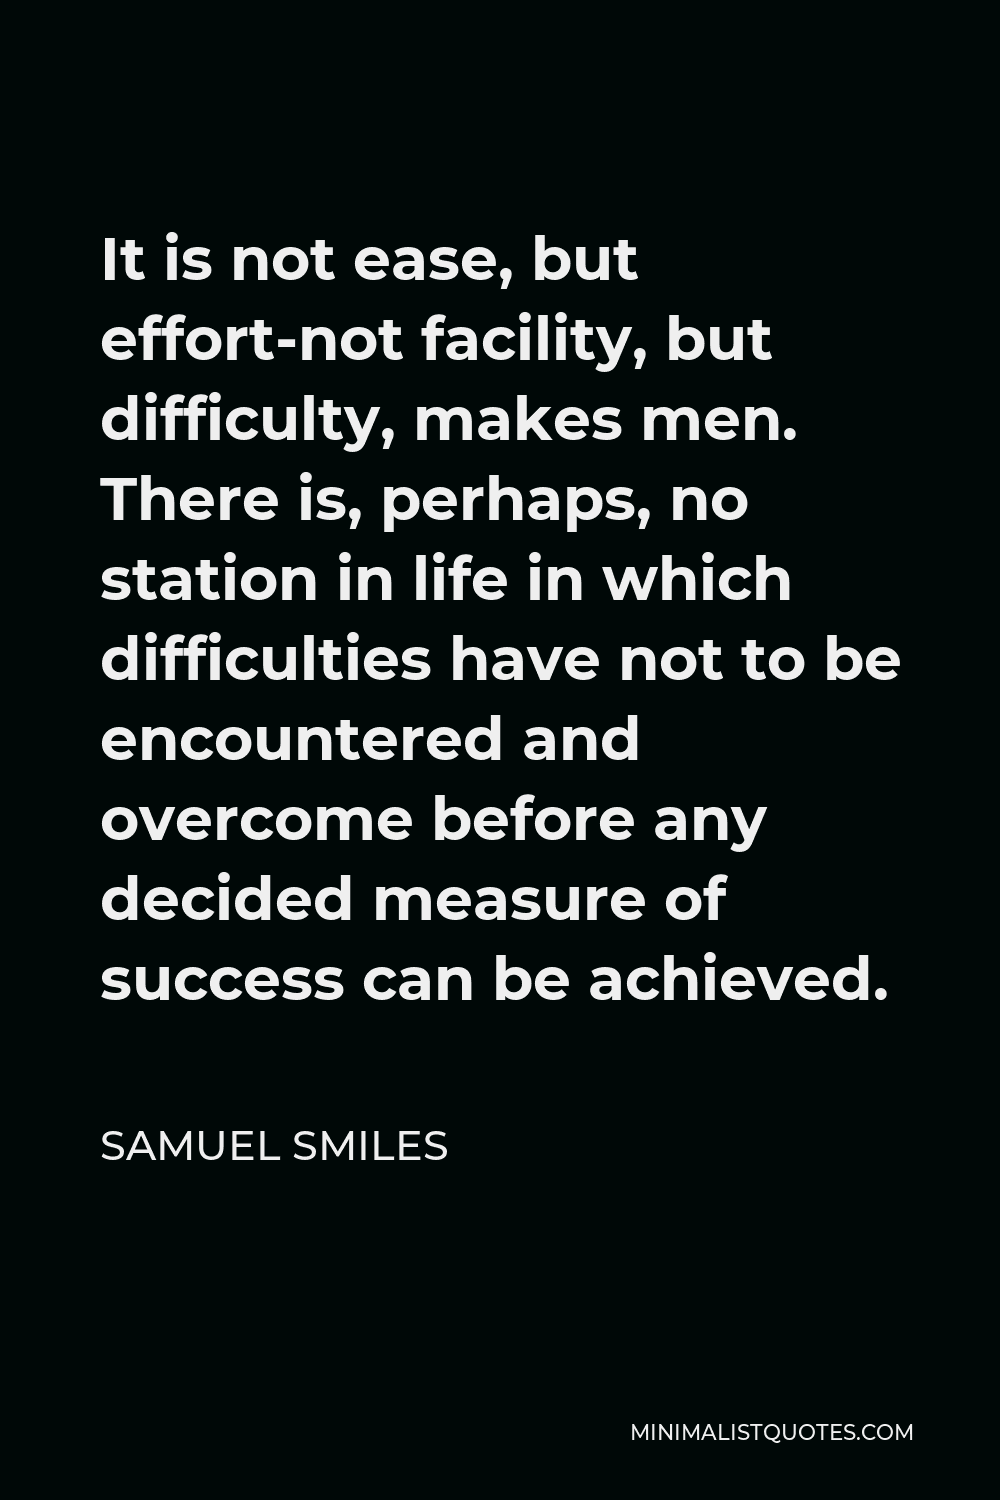 Samuel Smiles Quote - It is not ease, but effort-not facility, but difficulty, makes men. There is, perhaps, no station in life in which difficulties have not to be encountered and overcome before any decided measure of success can be achieved.